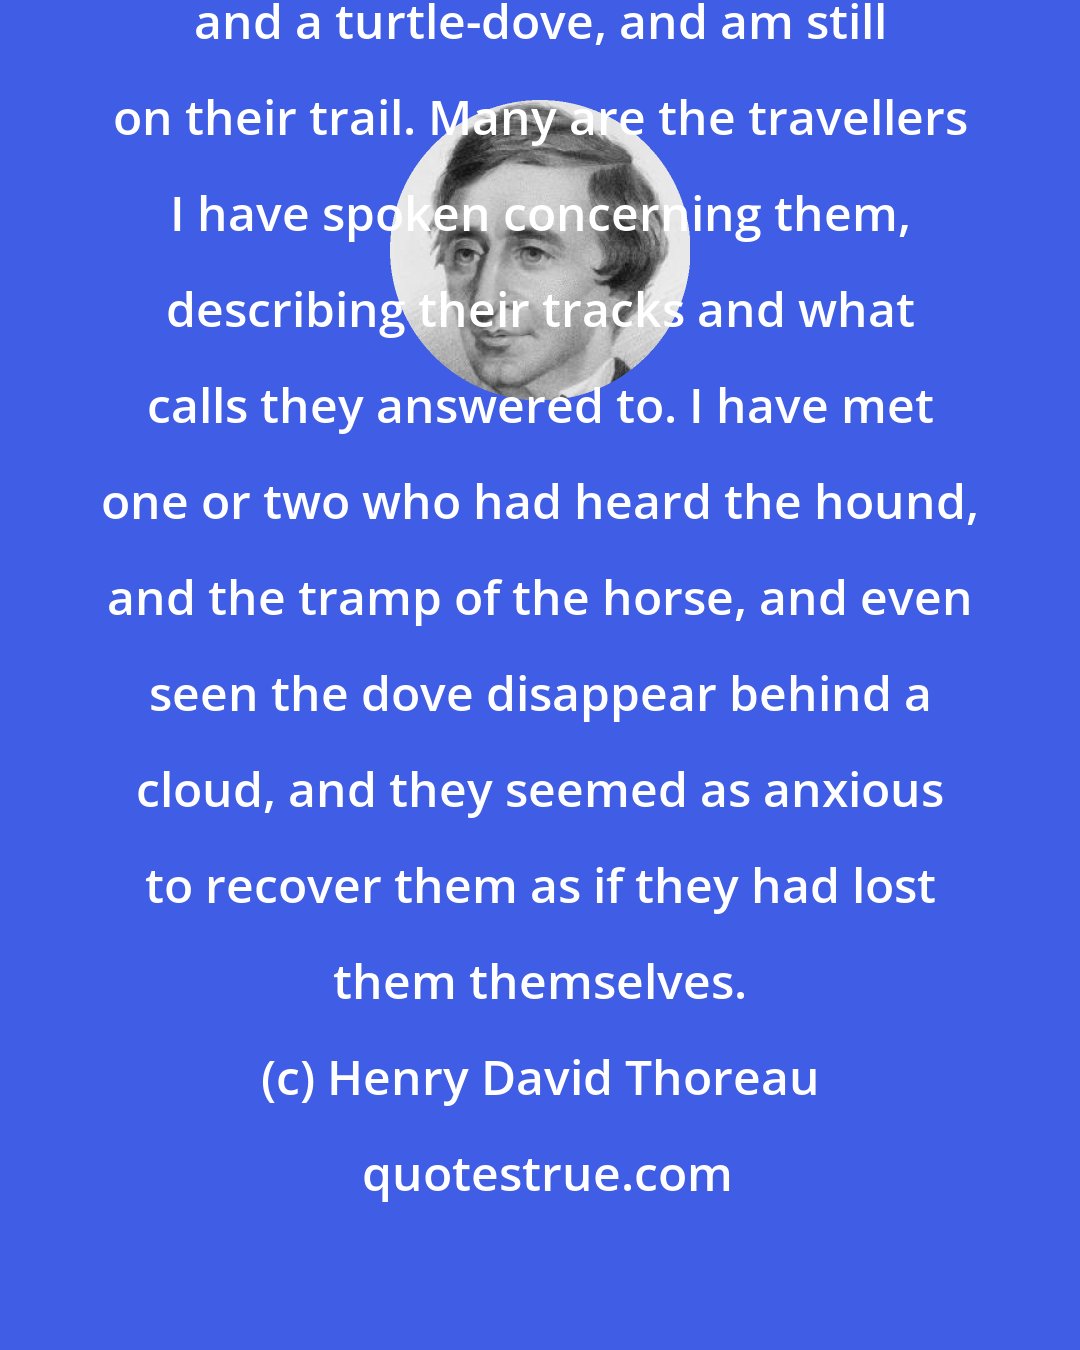 Henry David Thoreau: I long ago lost a hound, a bay horse, and a turtle-dove, and am still on their trail. Many are the travellers I have spoken concerning them, describing their tracks and what calls they answered to. I have met one or two who had heard the hound, and the tramp of the horse, and even seen the dove disappear behind a cloud, and they seemed as anxious to recover them as if they had lost them themselves.